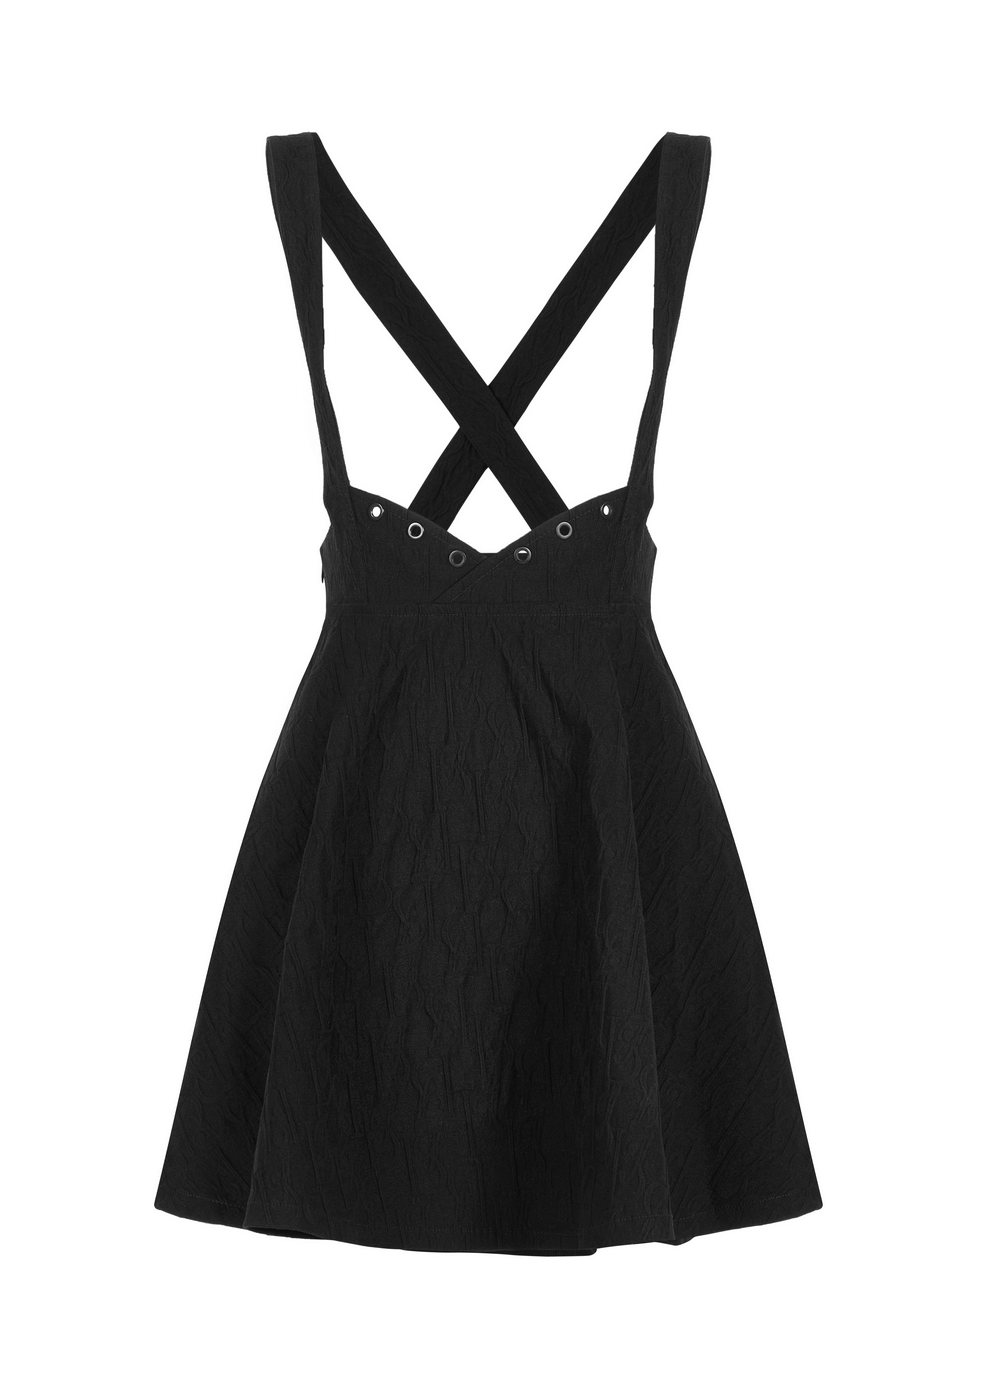 High-Waist Cat Ear Swing Skirt with Gothic Accents